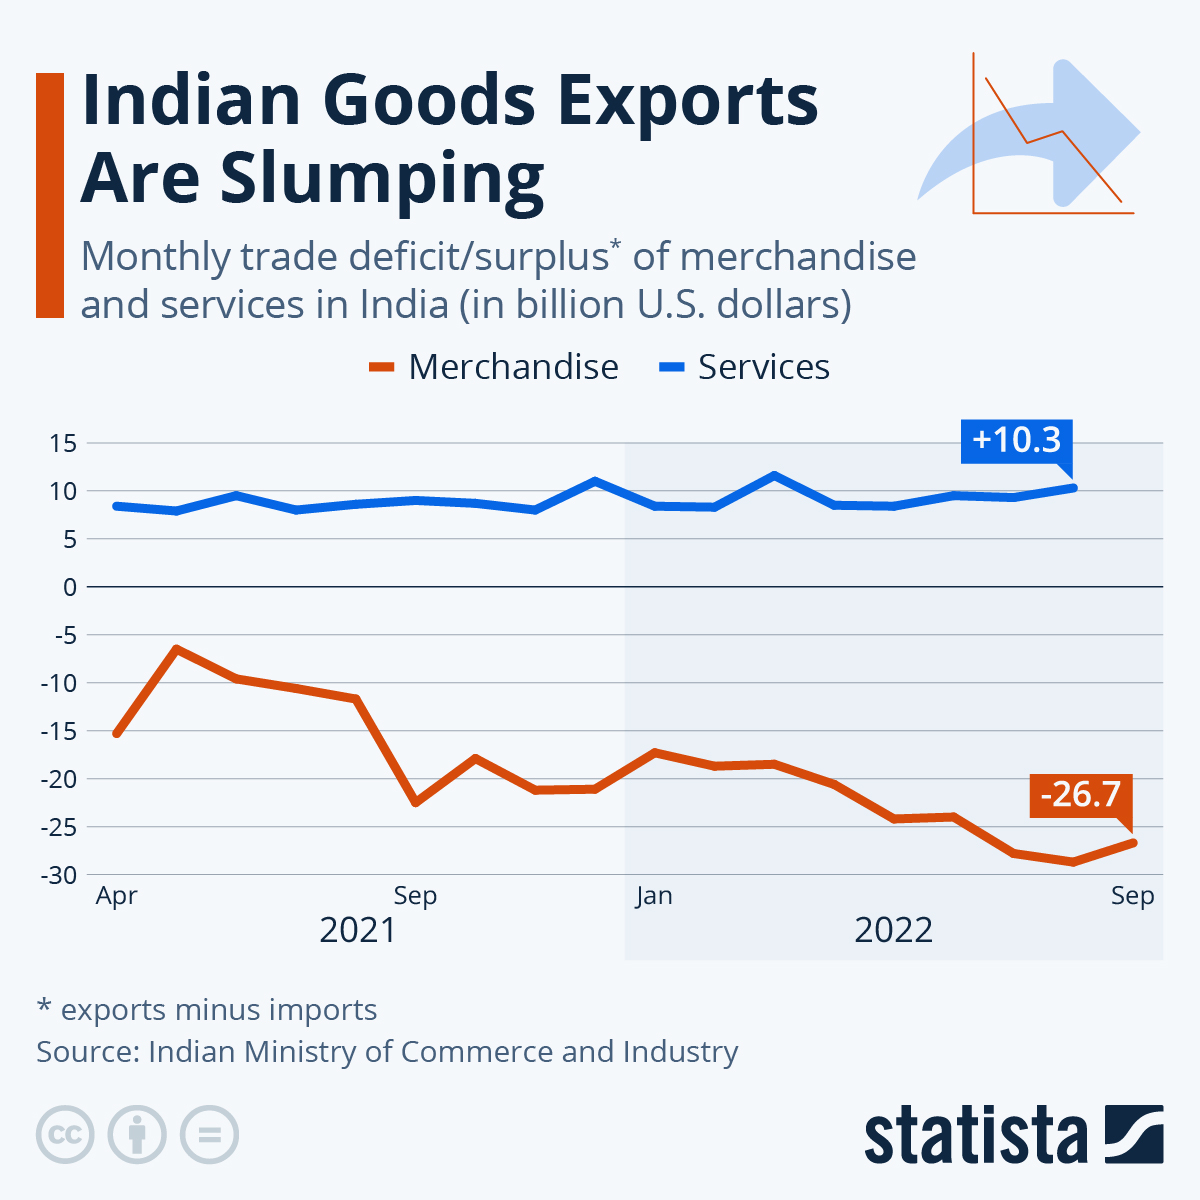 India's exports